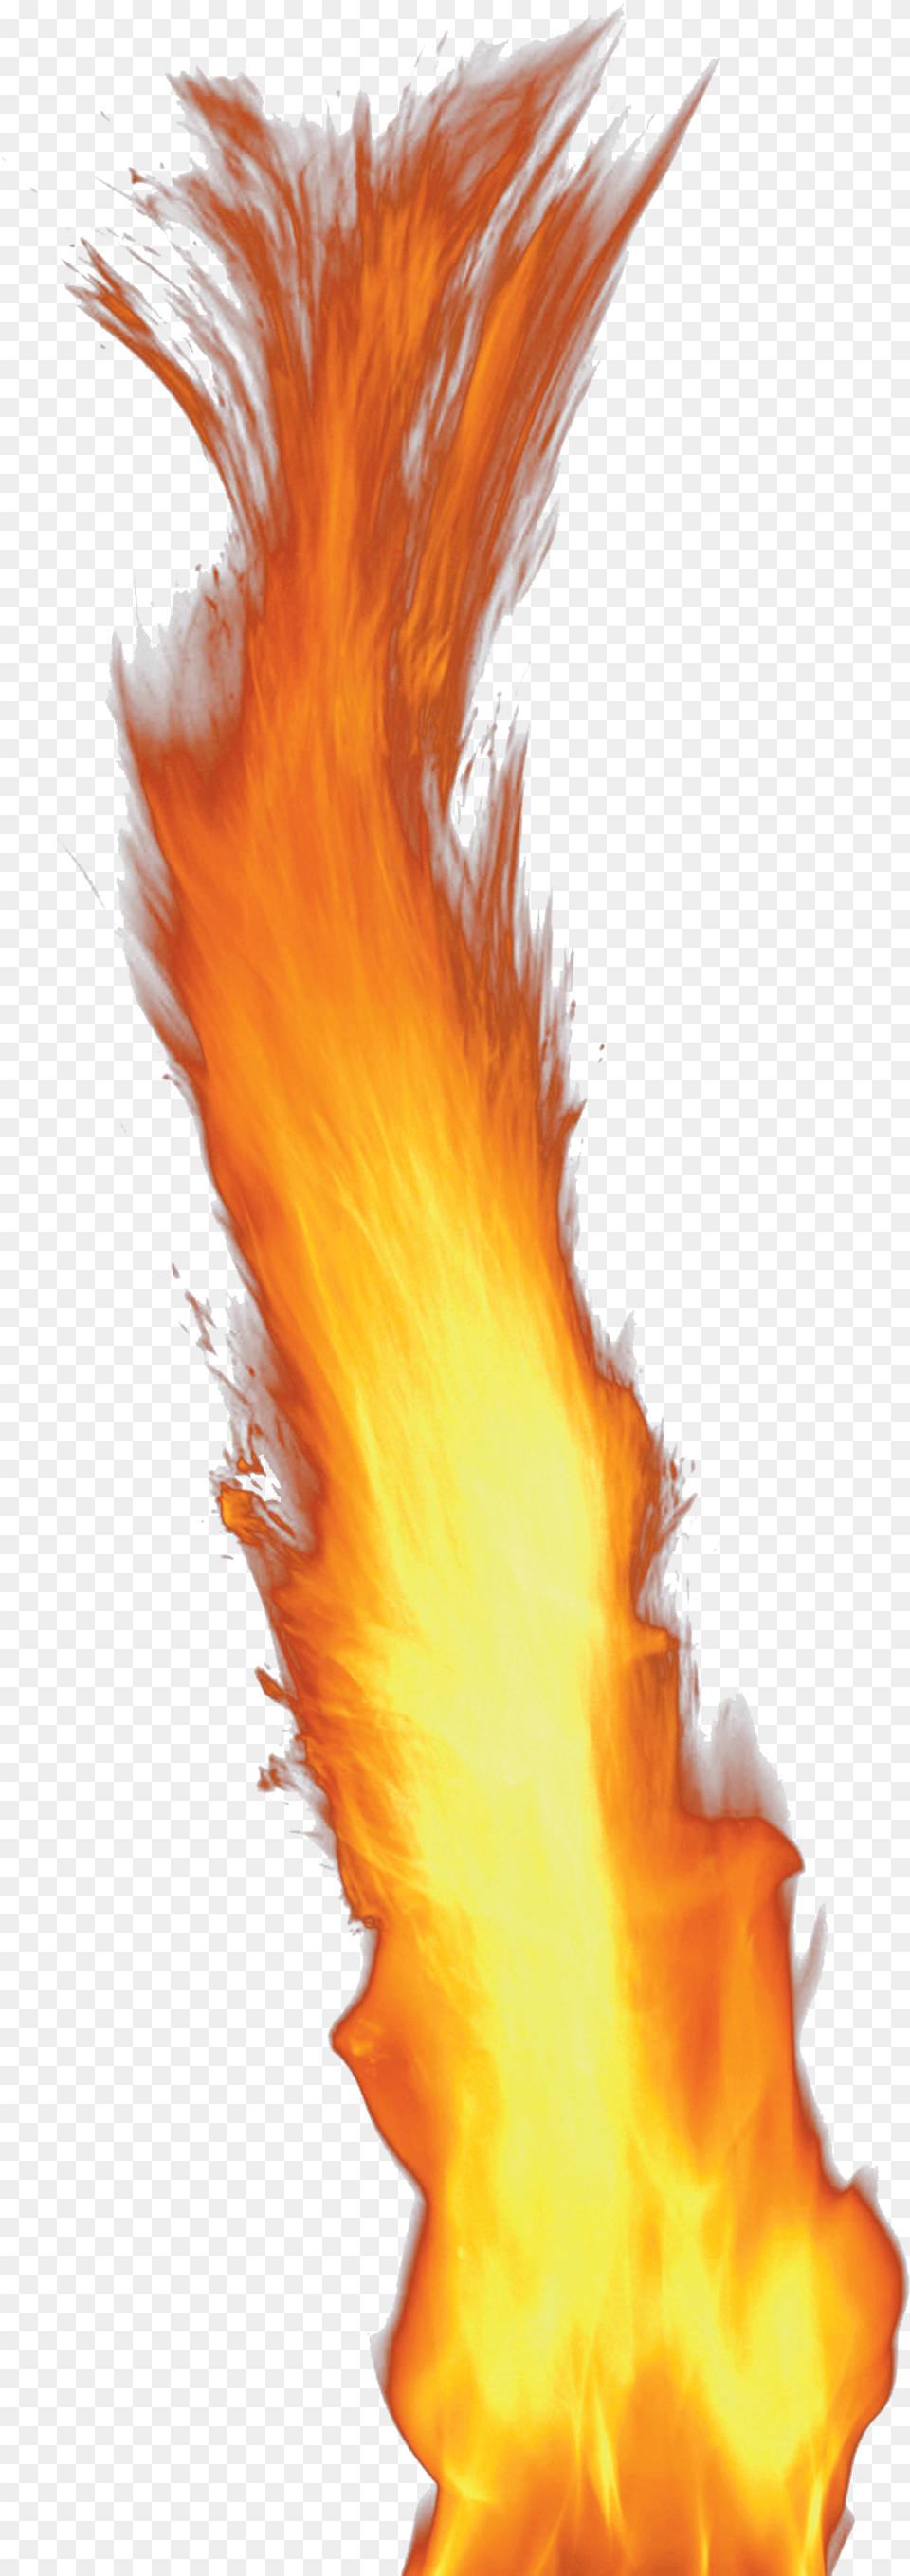 Fire Flame Image Download Background Flame Gif, Person Free Transparent Png